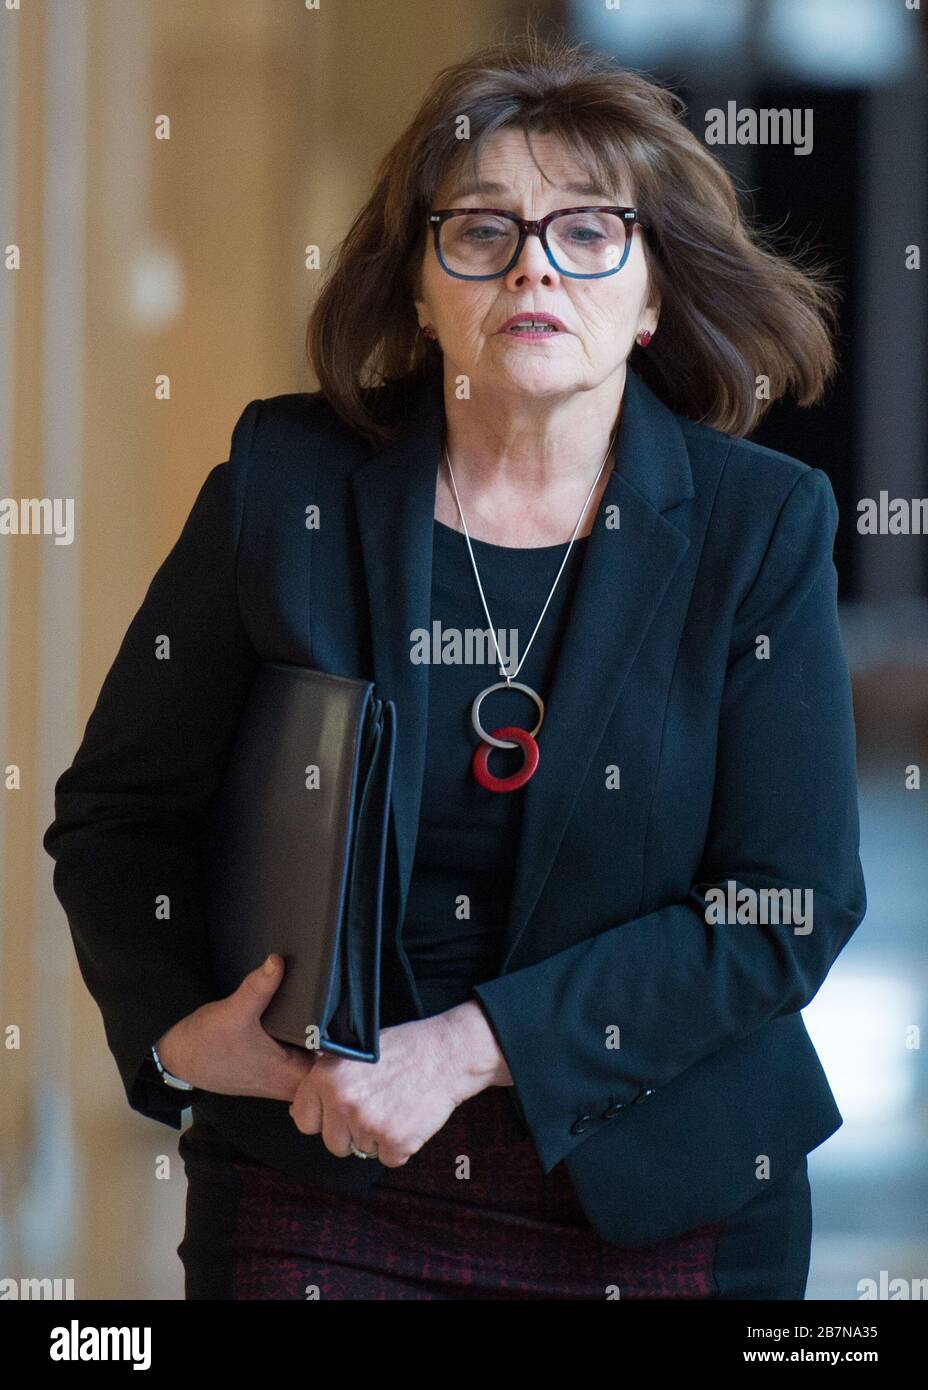 Edinburgh, UK. 17th Mar, 2020. Pictured: Jeane Freeman MSP - Cabinet Minister for Health and Sport. Ministerial Statement: Novel coronavirus COVID-19 update Credit: Colin Fisher/Alamy Live News Stock Photo